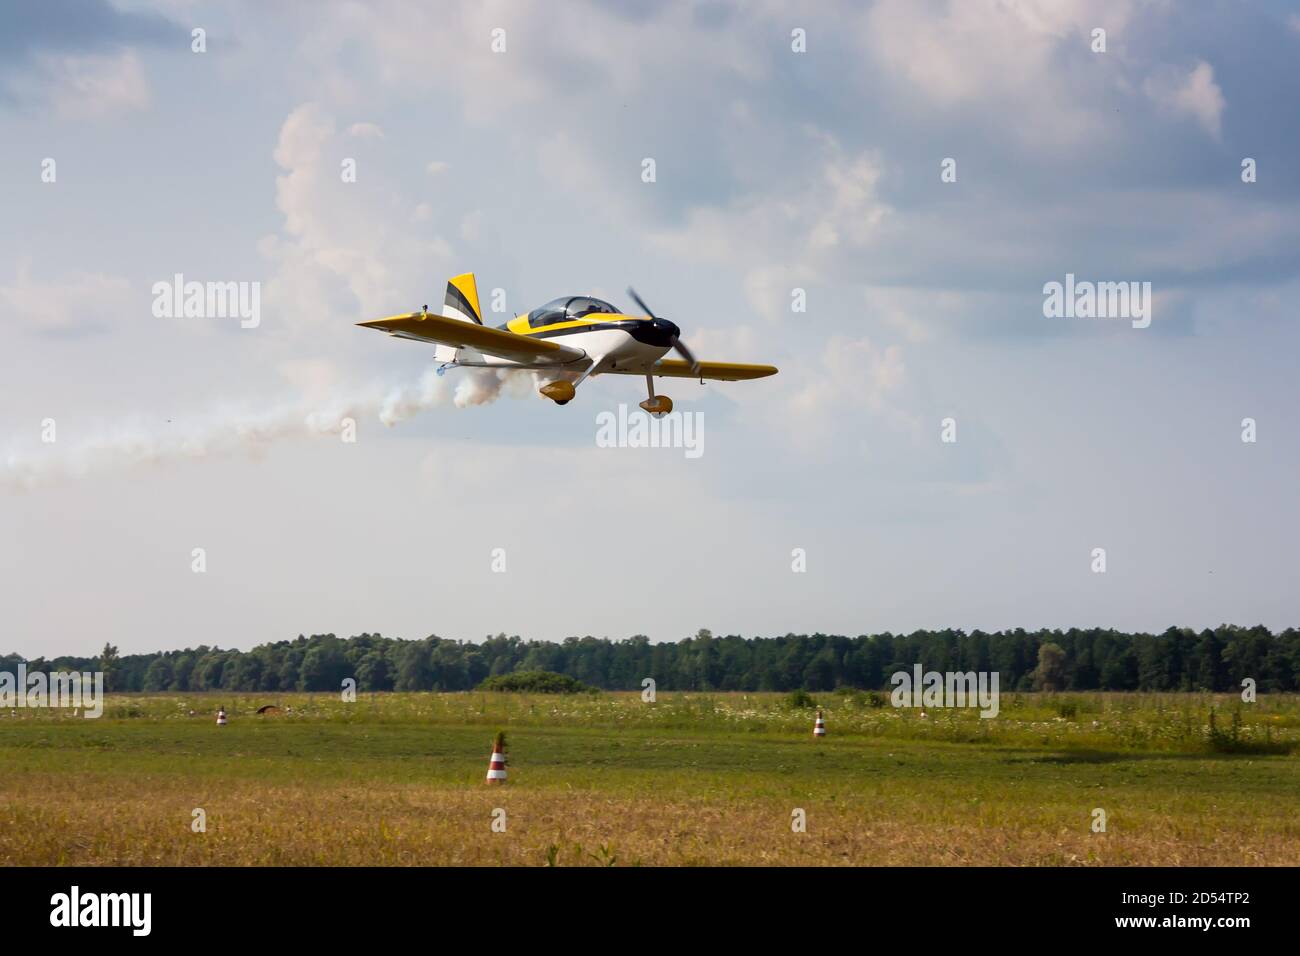 Low pass of a small sports plane with smoke Stock Photo